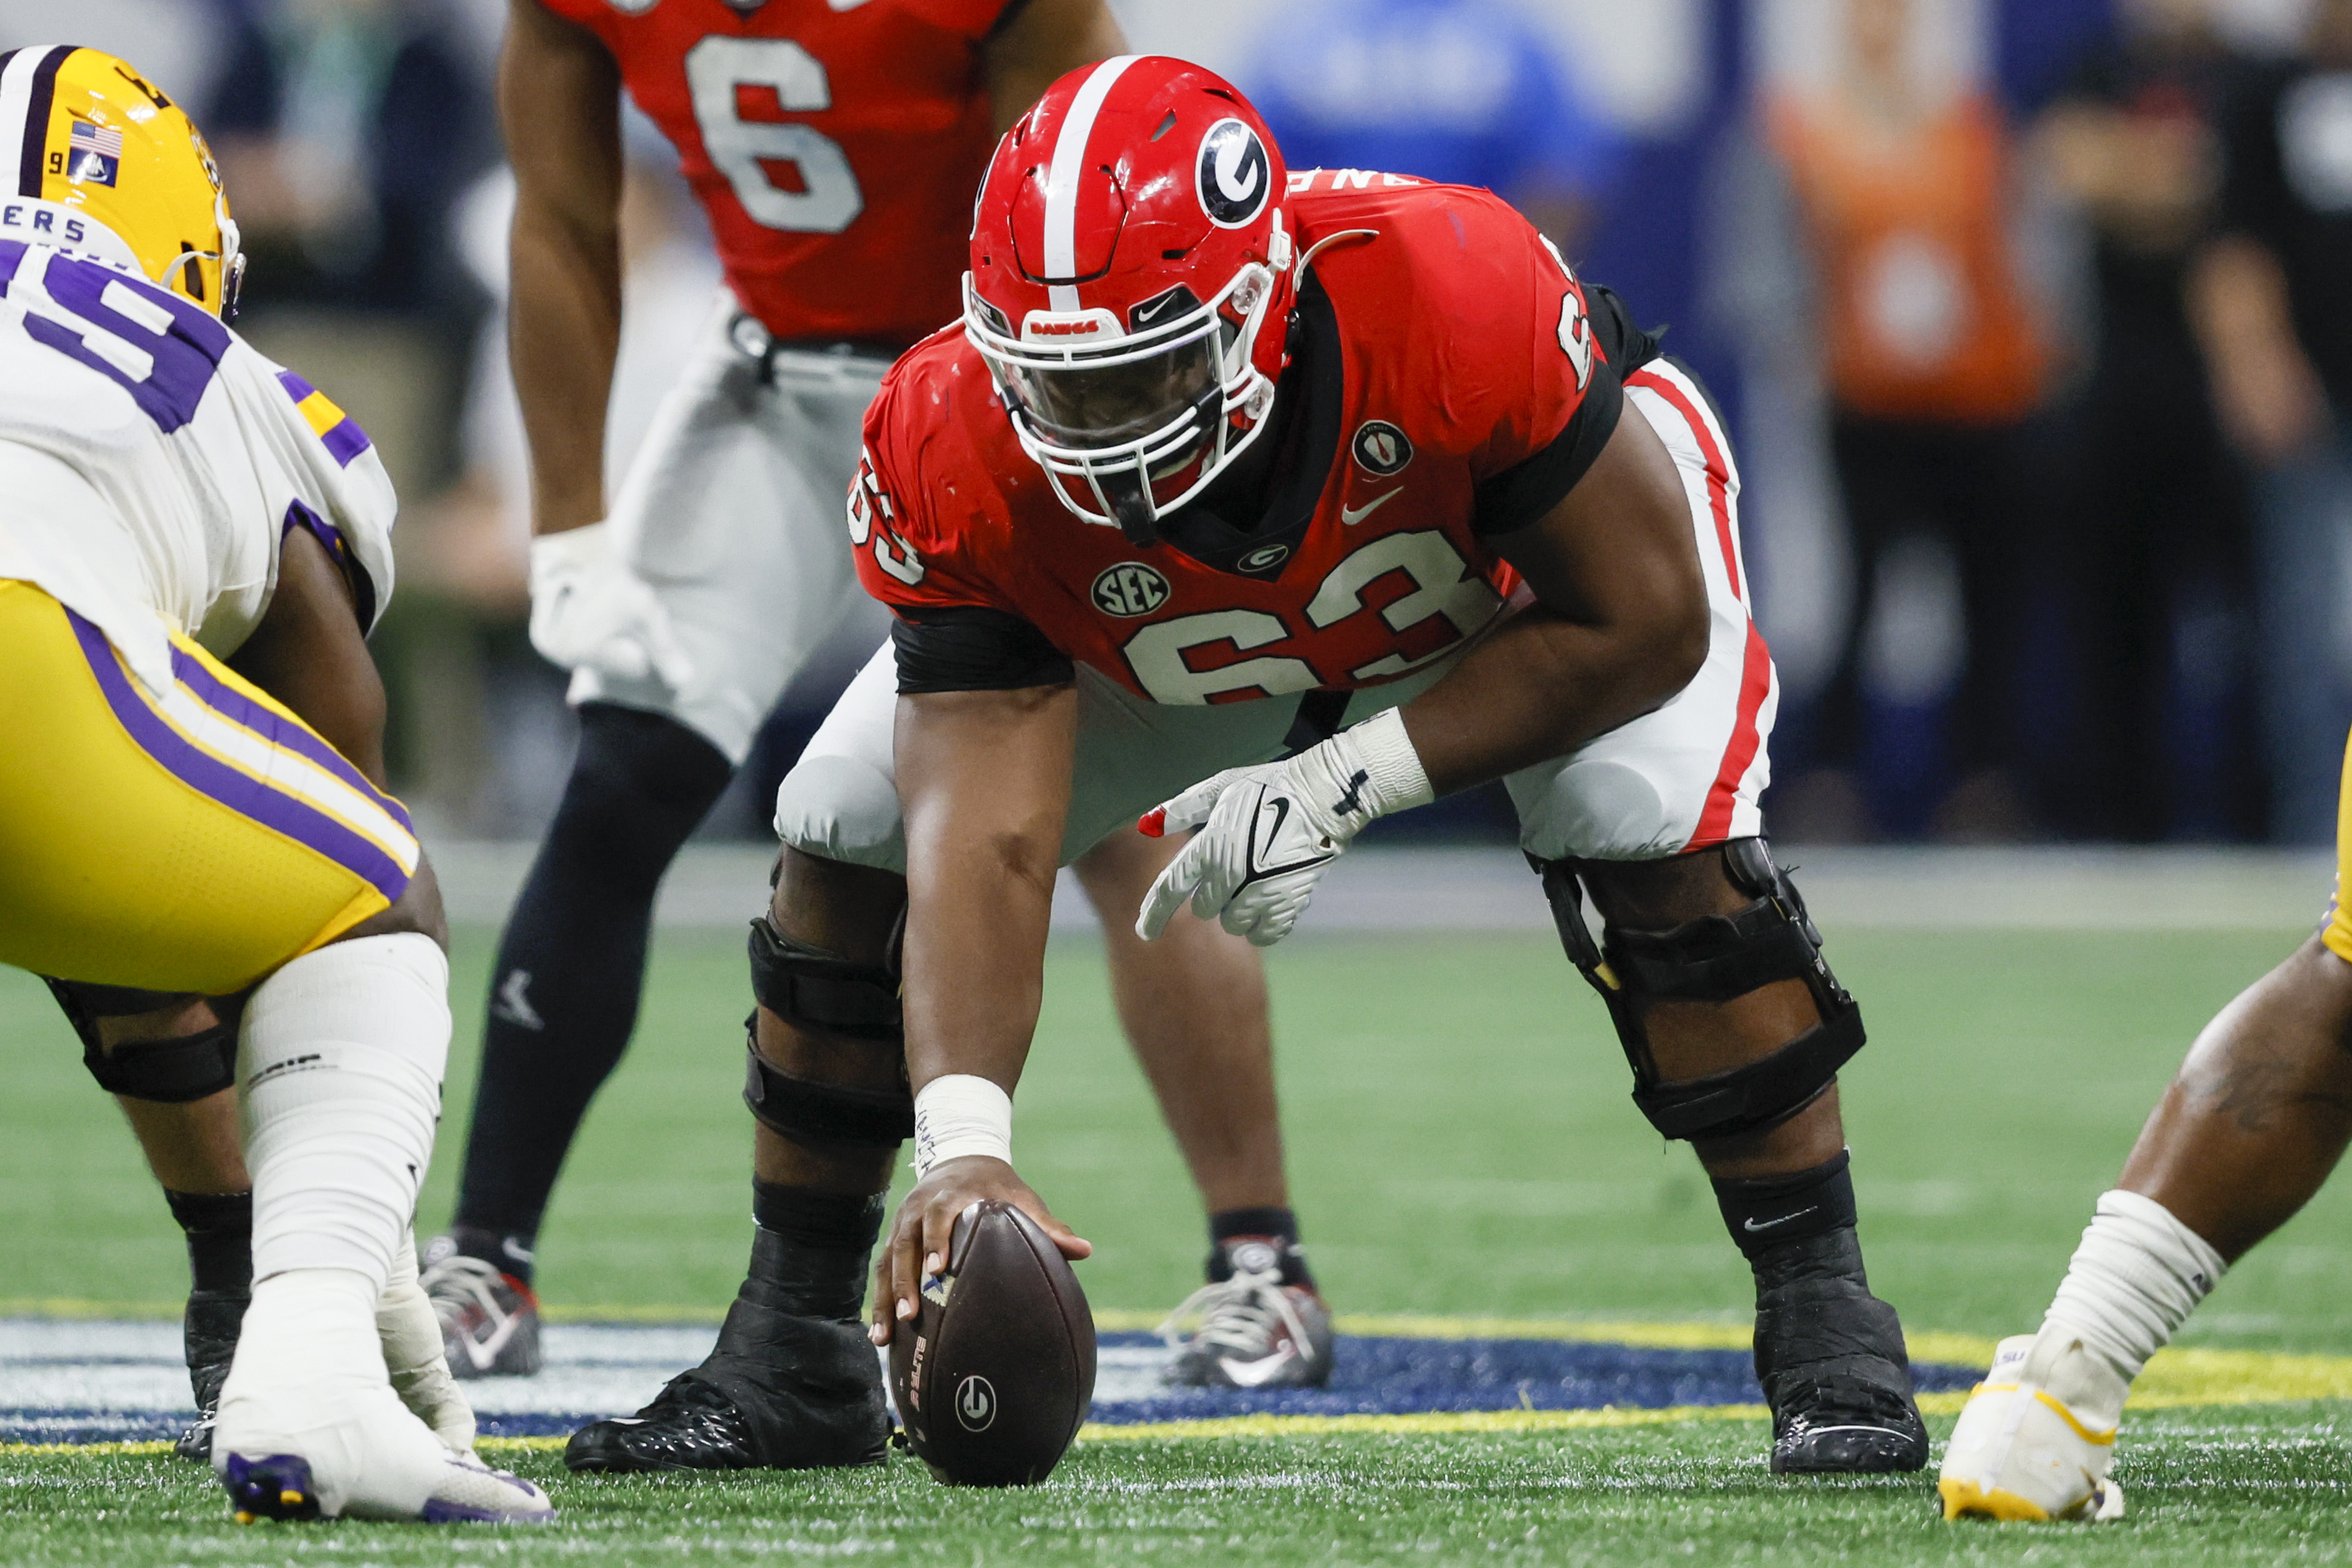 Spring preview: UGA's offensive line once again reason for optimism